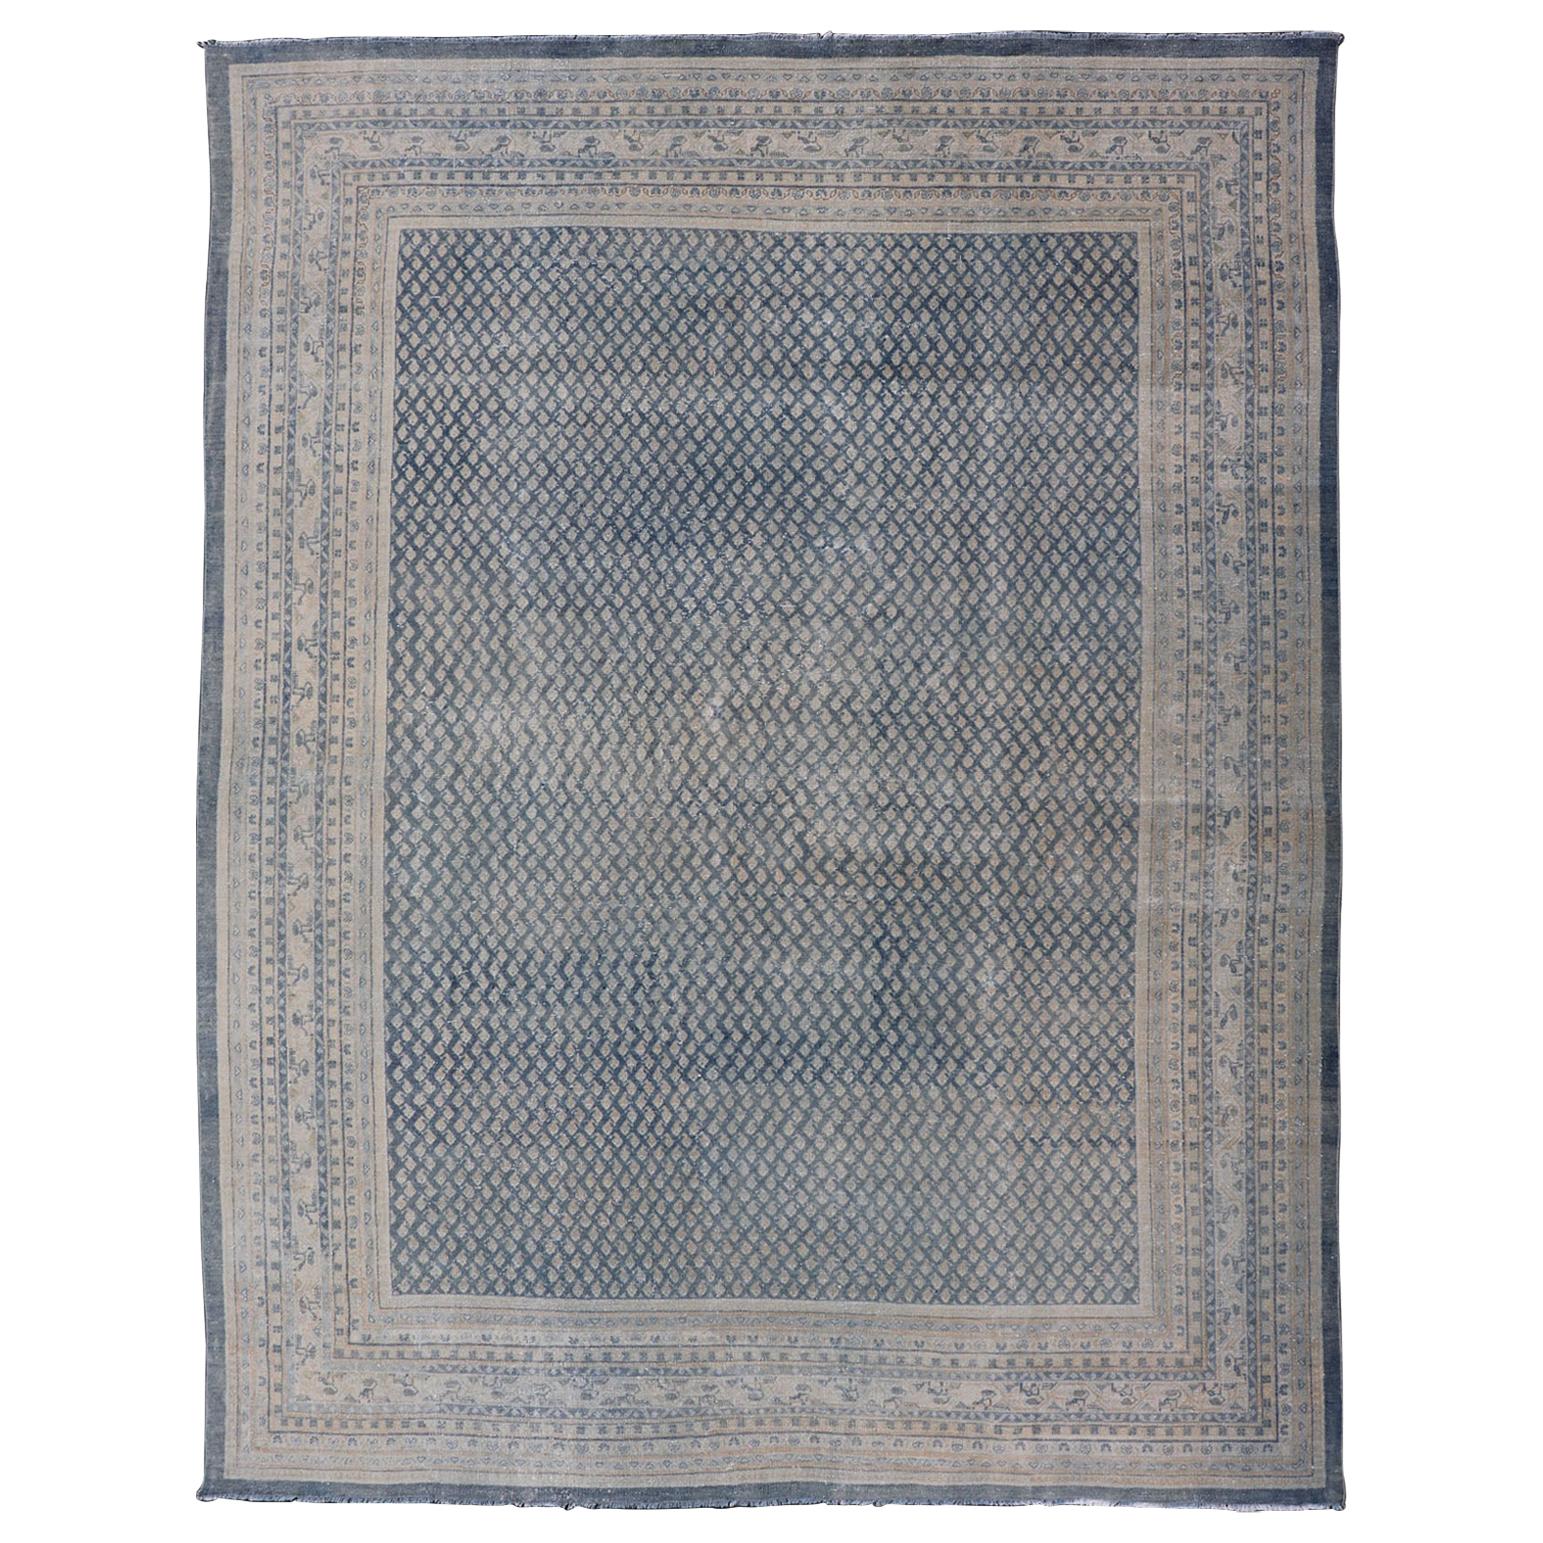 Minimalist Design Antique Persian Tabriz Rug with Modern Look in Blue Tones For Sale